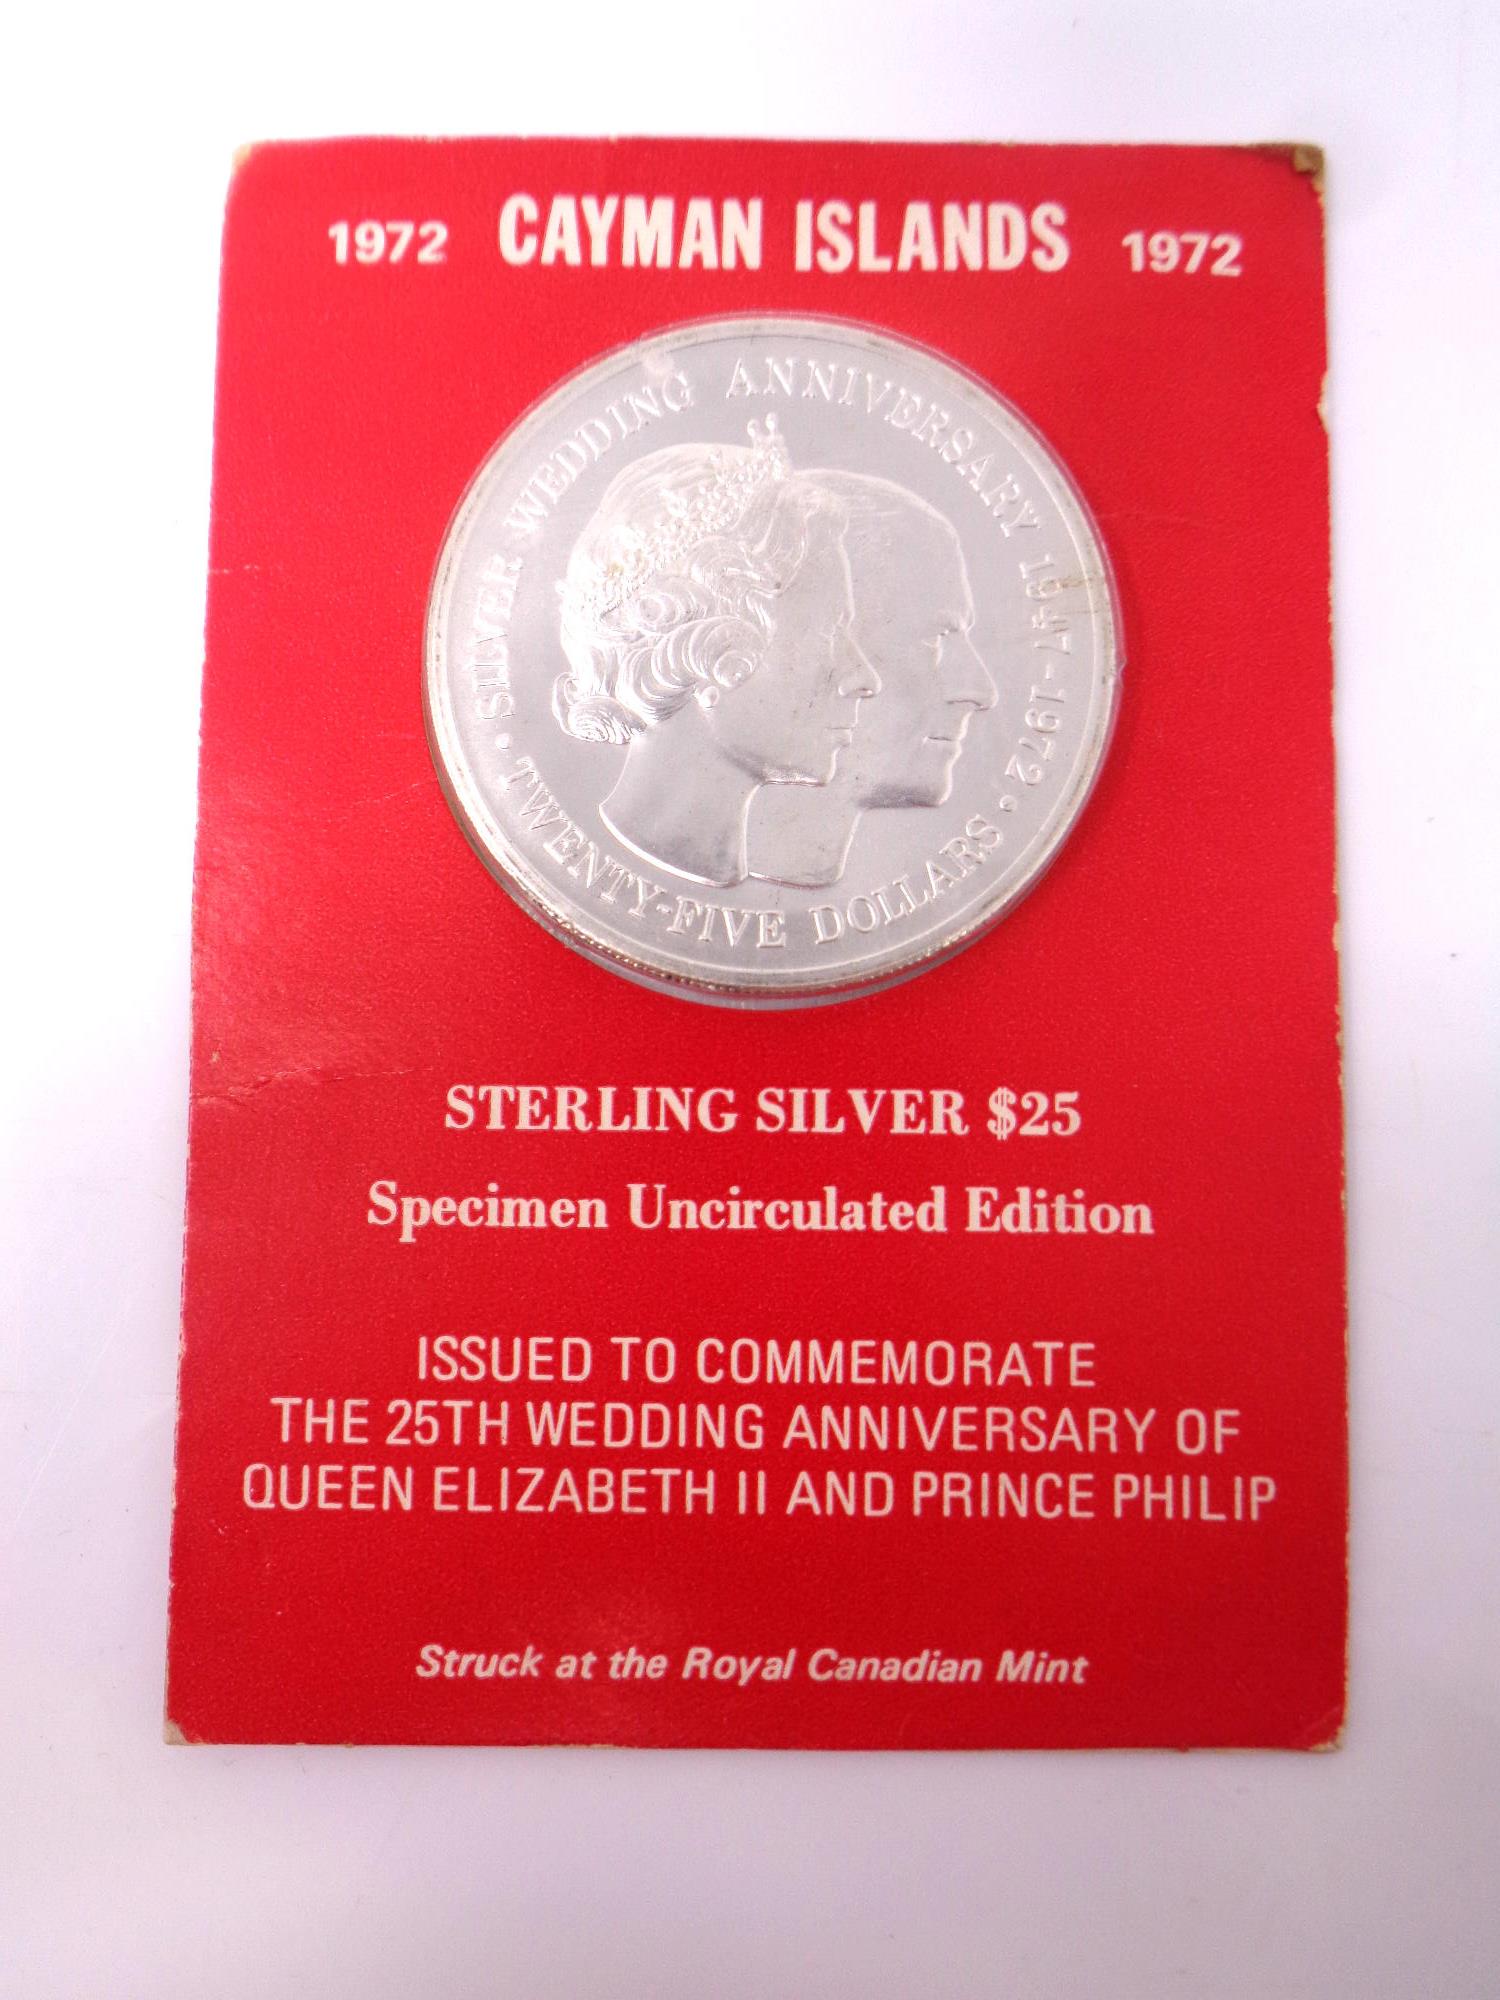 A Cayman Islands sterling silver uncirculated commemorative 25 dollar coin.